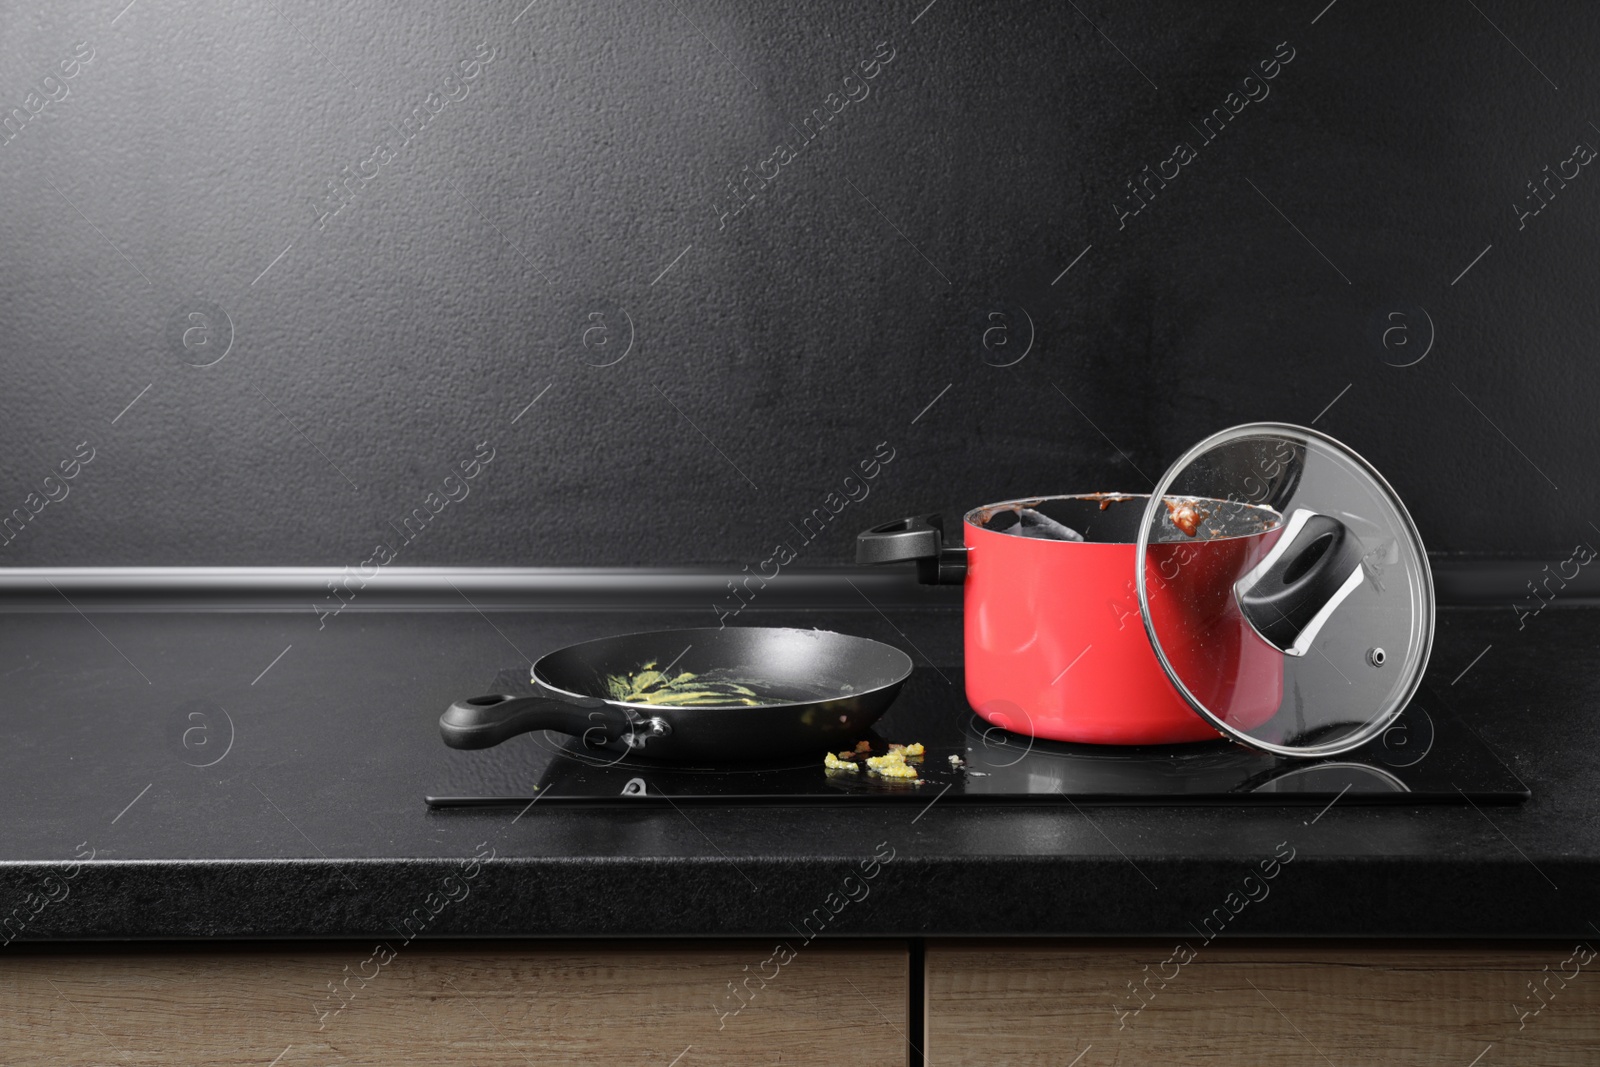 Photo of Dirty pot and frying pan on cooktop in kitchen, space for text